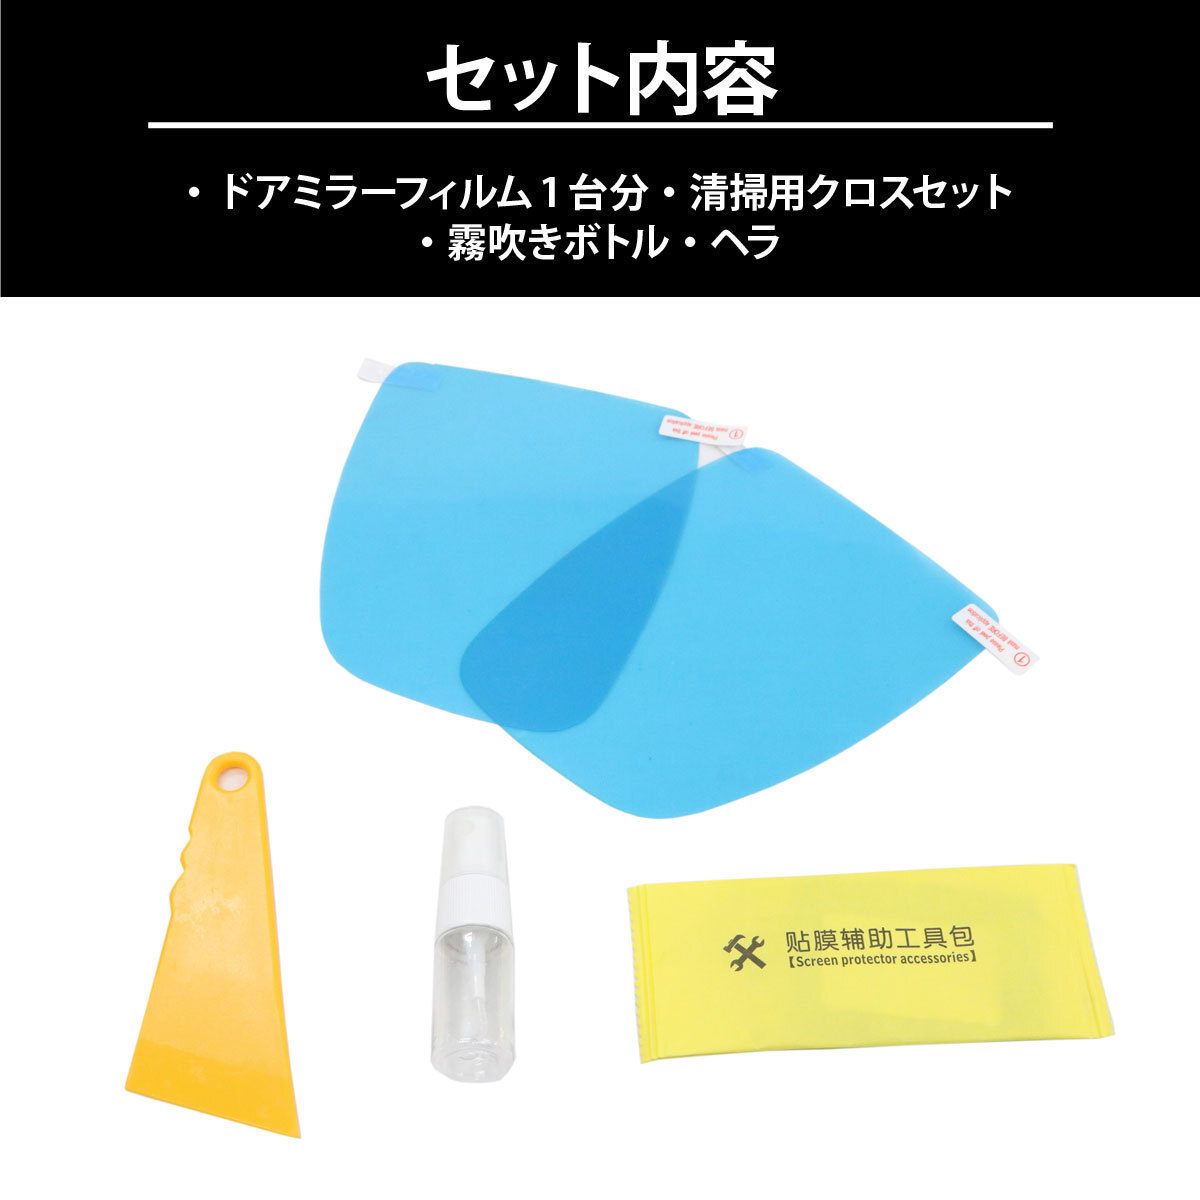  postage 185 jpy car make exclusive use Volvo S60 2011~ V60 11~13 exclusive use water-repellent door mirror film left right set water-repellent effect 6 months shipping deadline 18 hour 